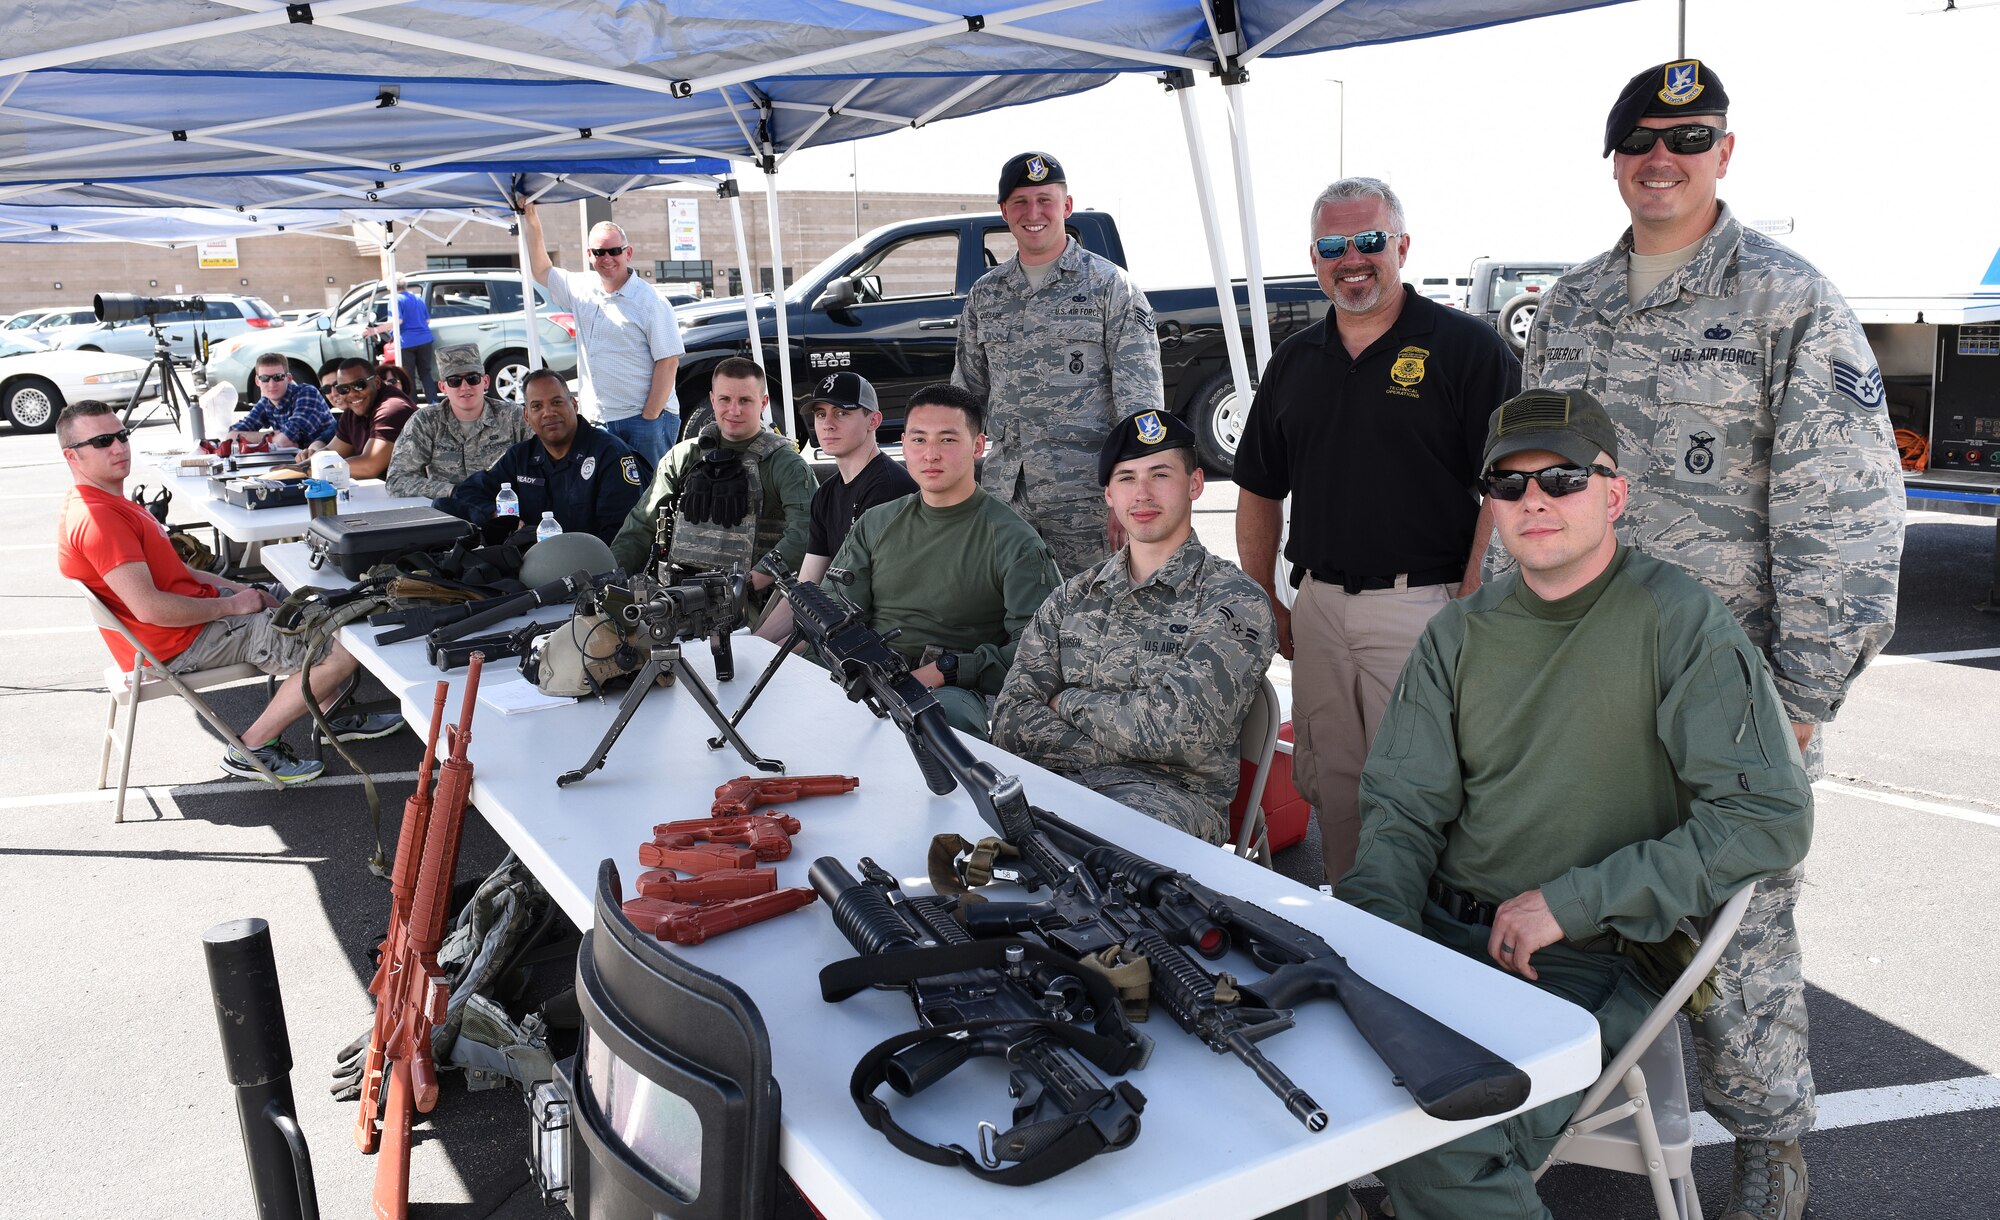 Members of Team Buckley gather for a group photo during a Police Week demonstration at Buckley Air Force Base, Colorado, May 17, 2018.